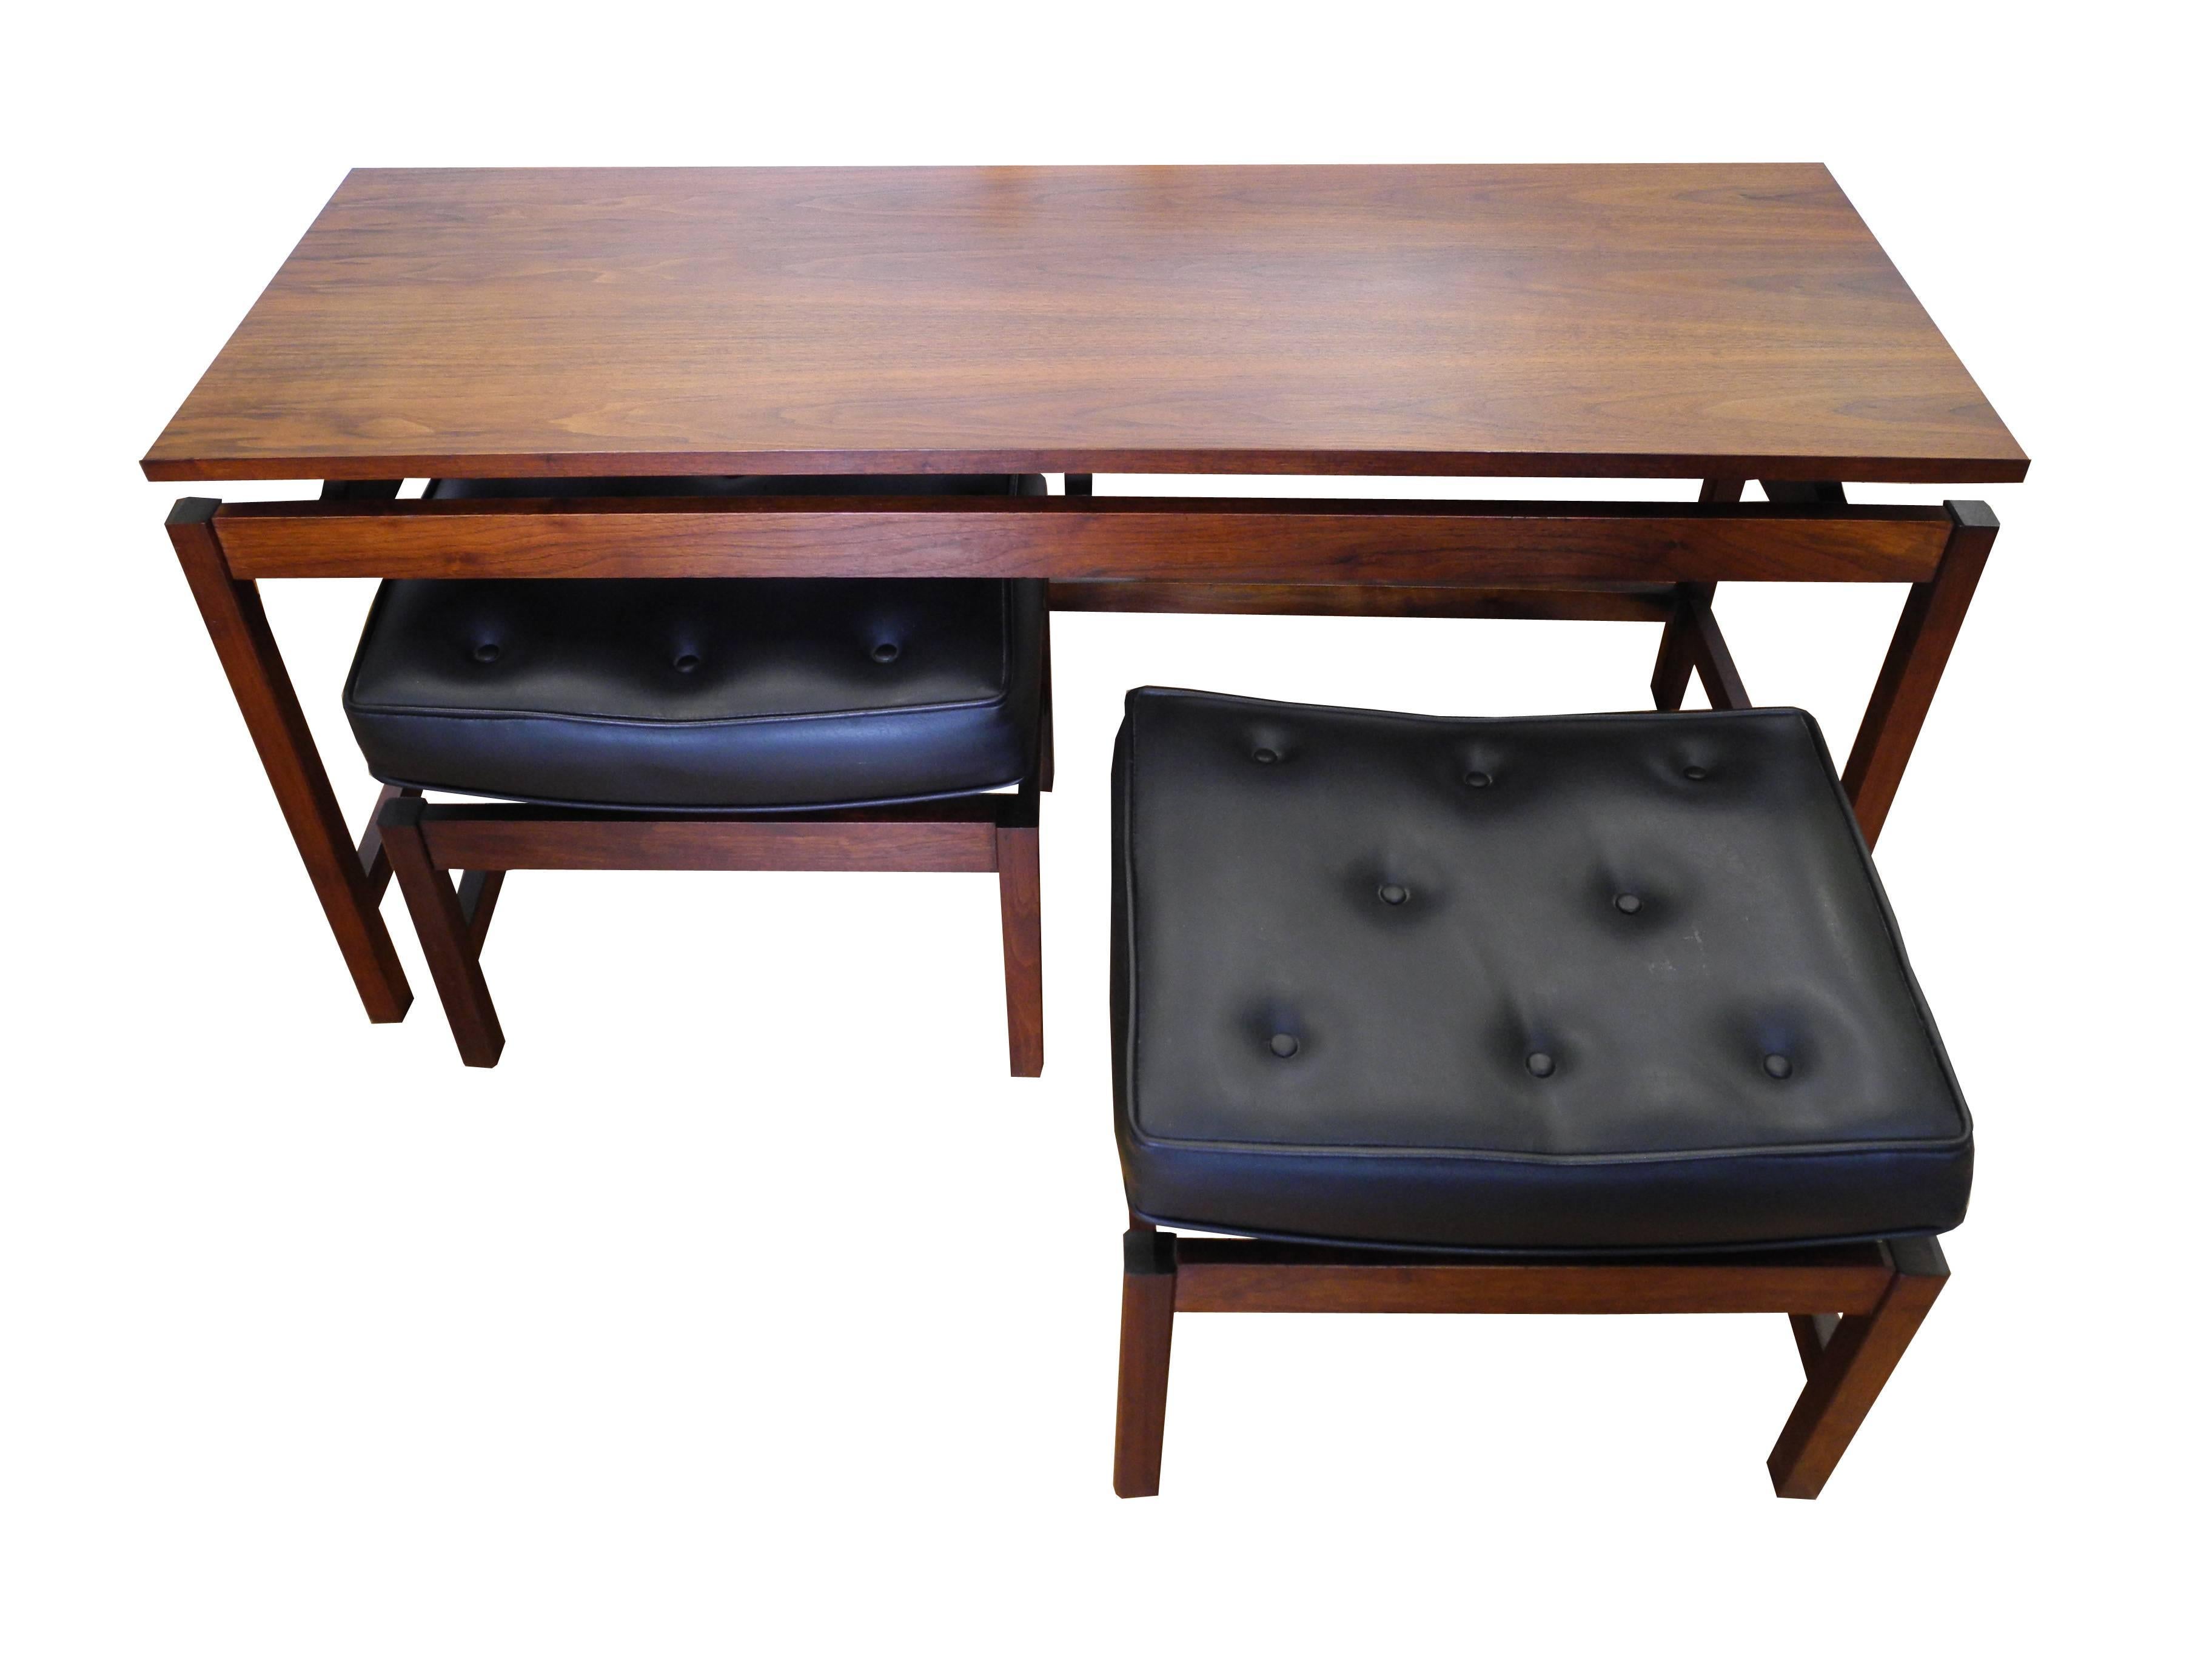 American Danish Modern Vintage Ottoman and Console Set in Walnut Attributed to Jens Risom